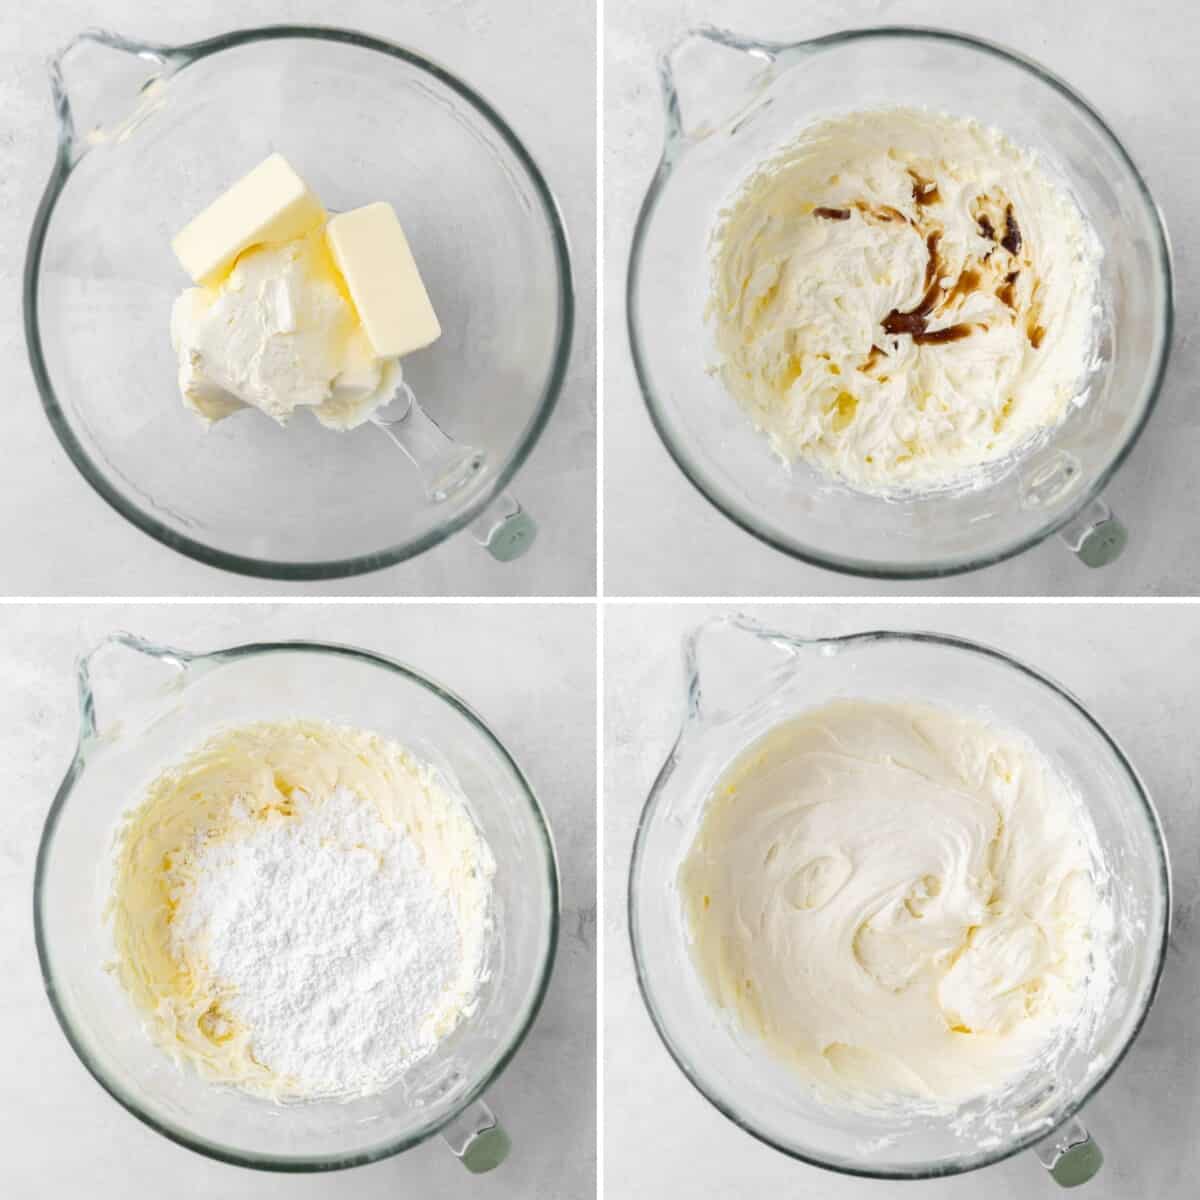 A collage of four images of a large glass measuring cup showing the various stages of making cream cheese frosting and adding the ingredients into the bowl and mixing together.